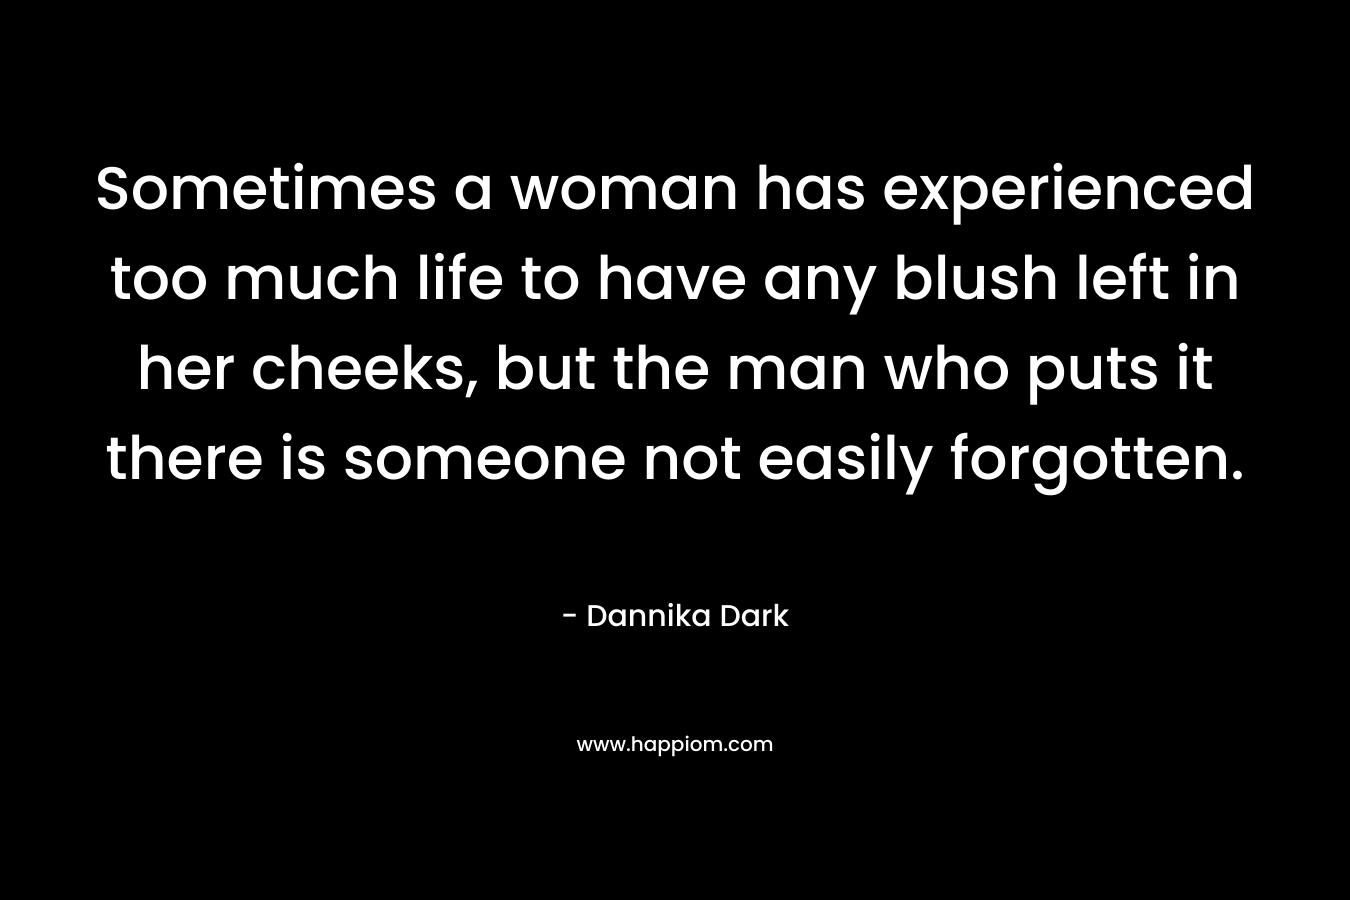 Sometimes a woman has experienced too much life to have any blush left in her cheeks, but the man who puts it there is someone not easily forgotten. – Dannika Dark